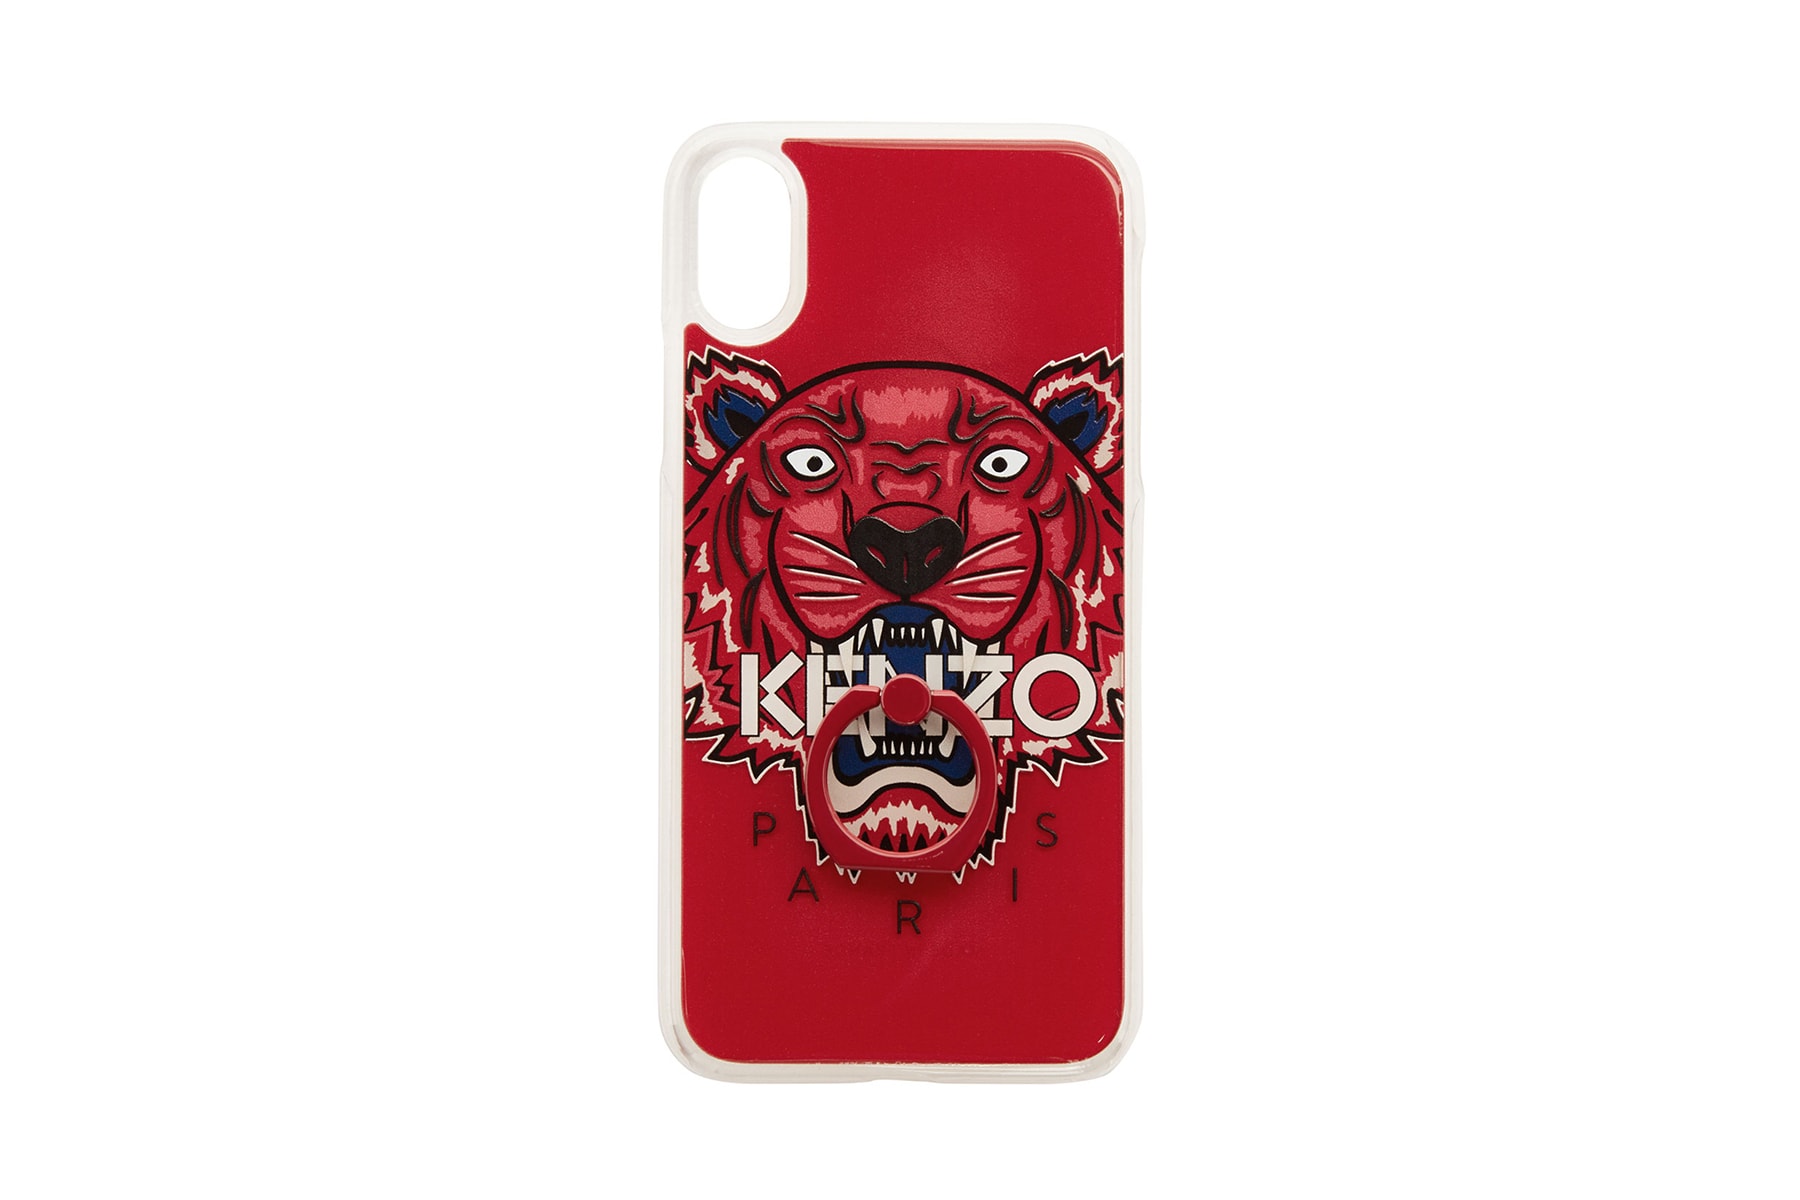 kenzo apple iphone x phone cases tiger limited edition red white blue ring holder